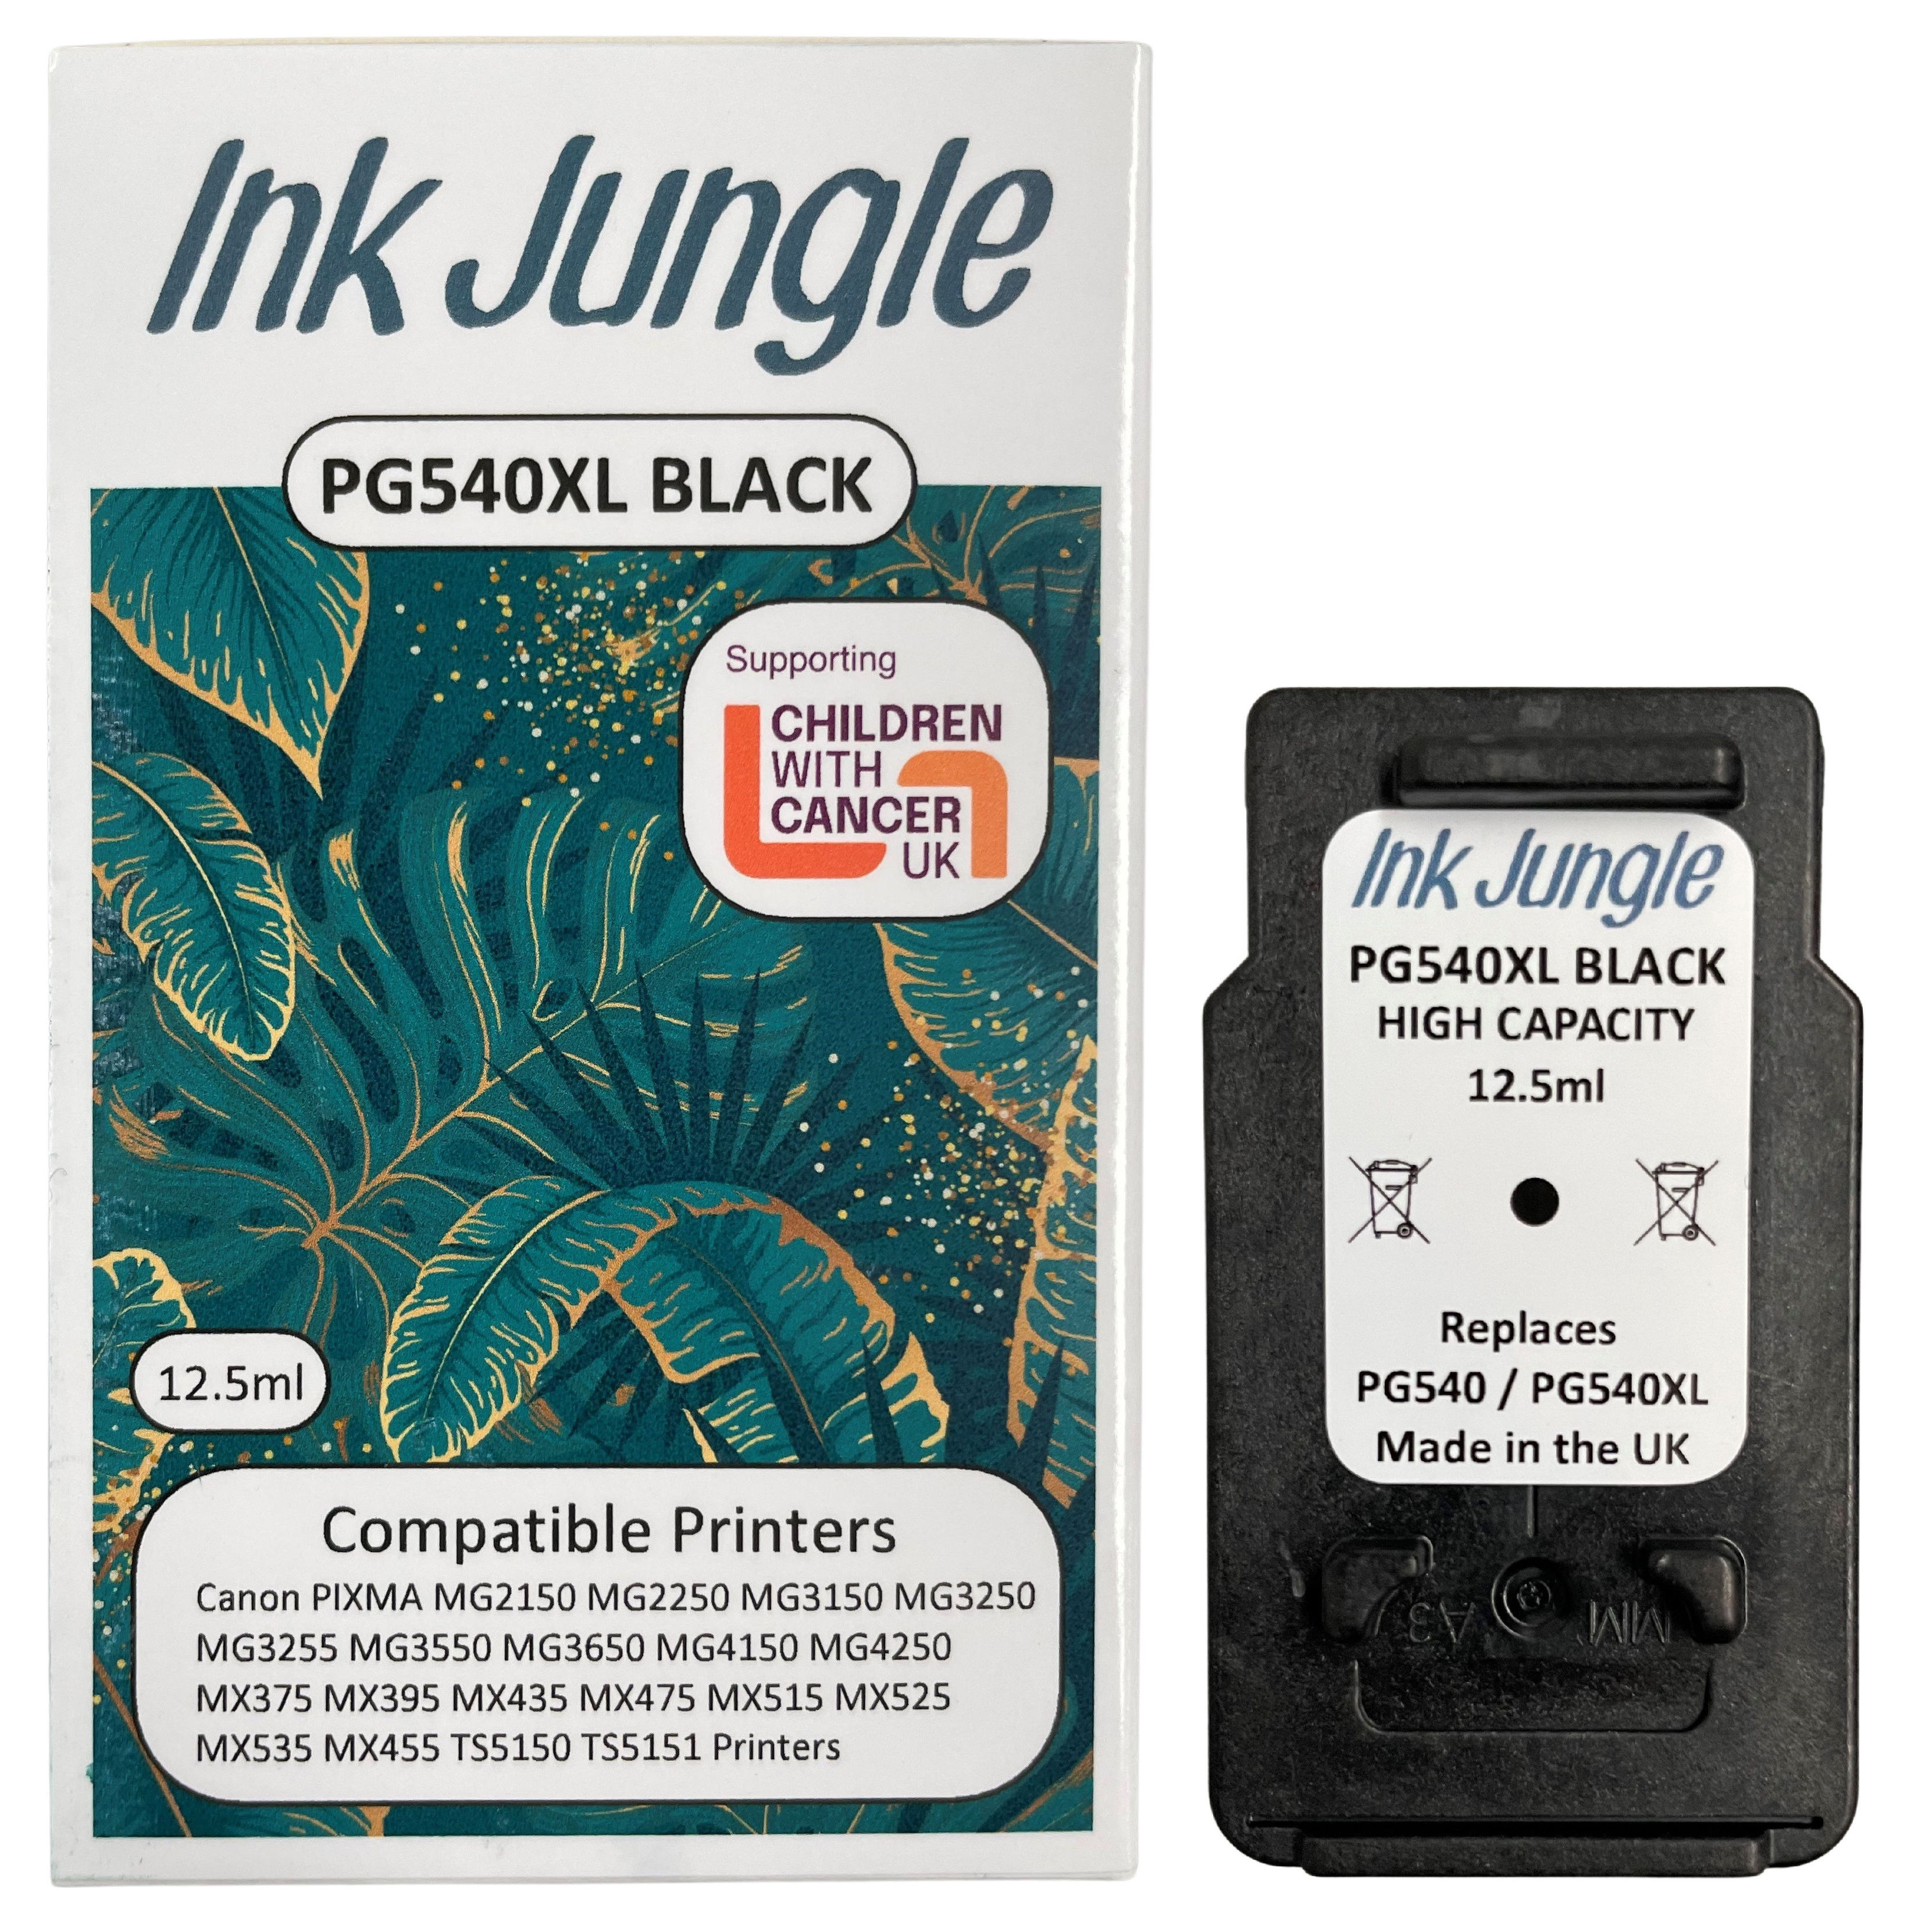 Canon PG540XL Black Refilled Ink Cartridge